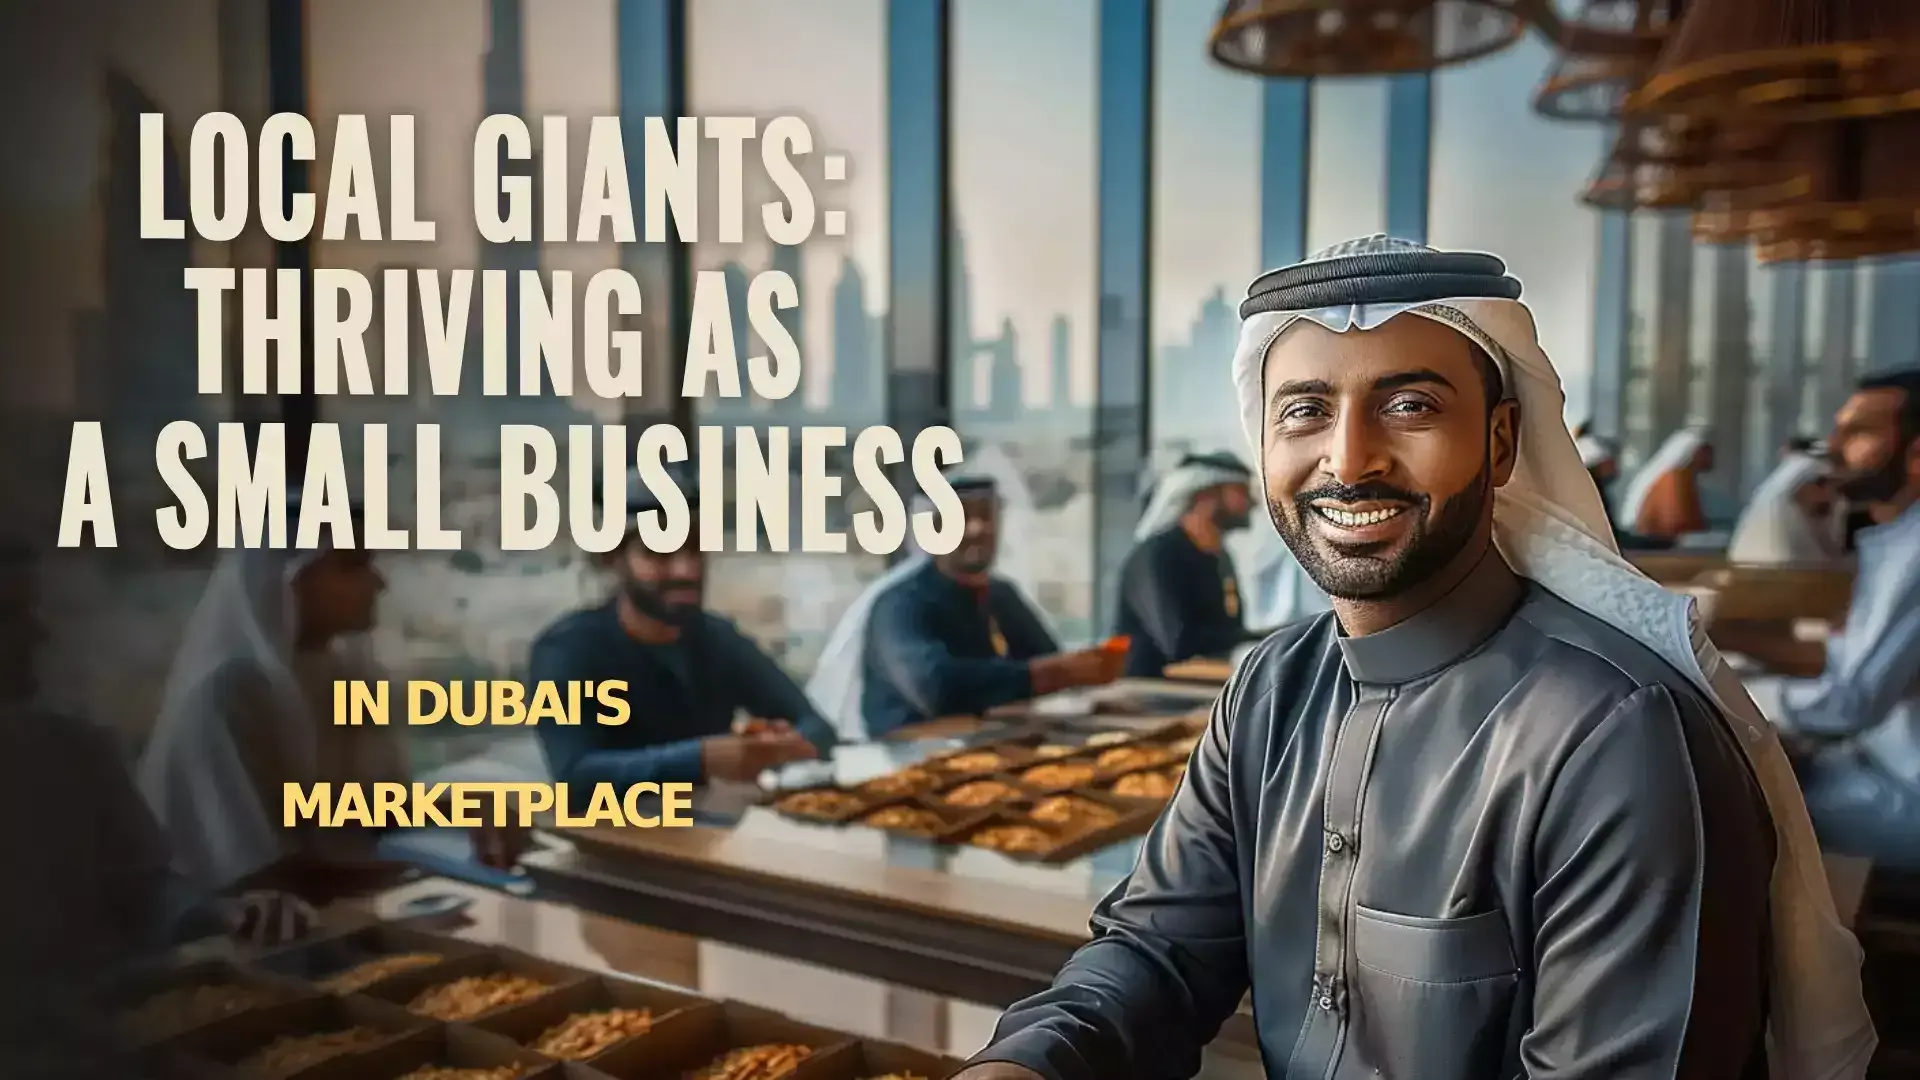 Small business diversity in Dubai - A bustling marketplace